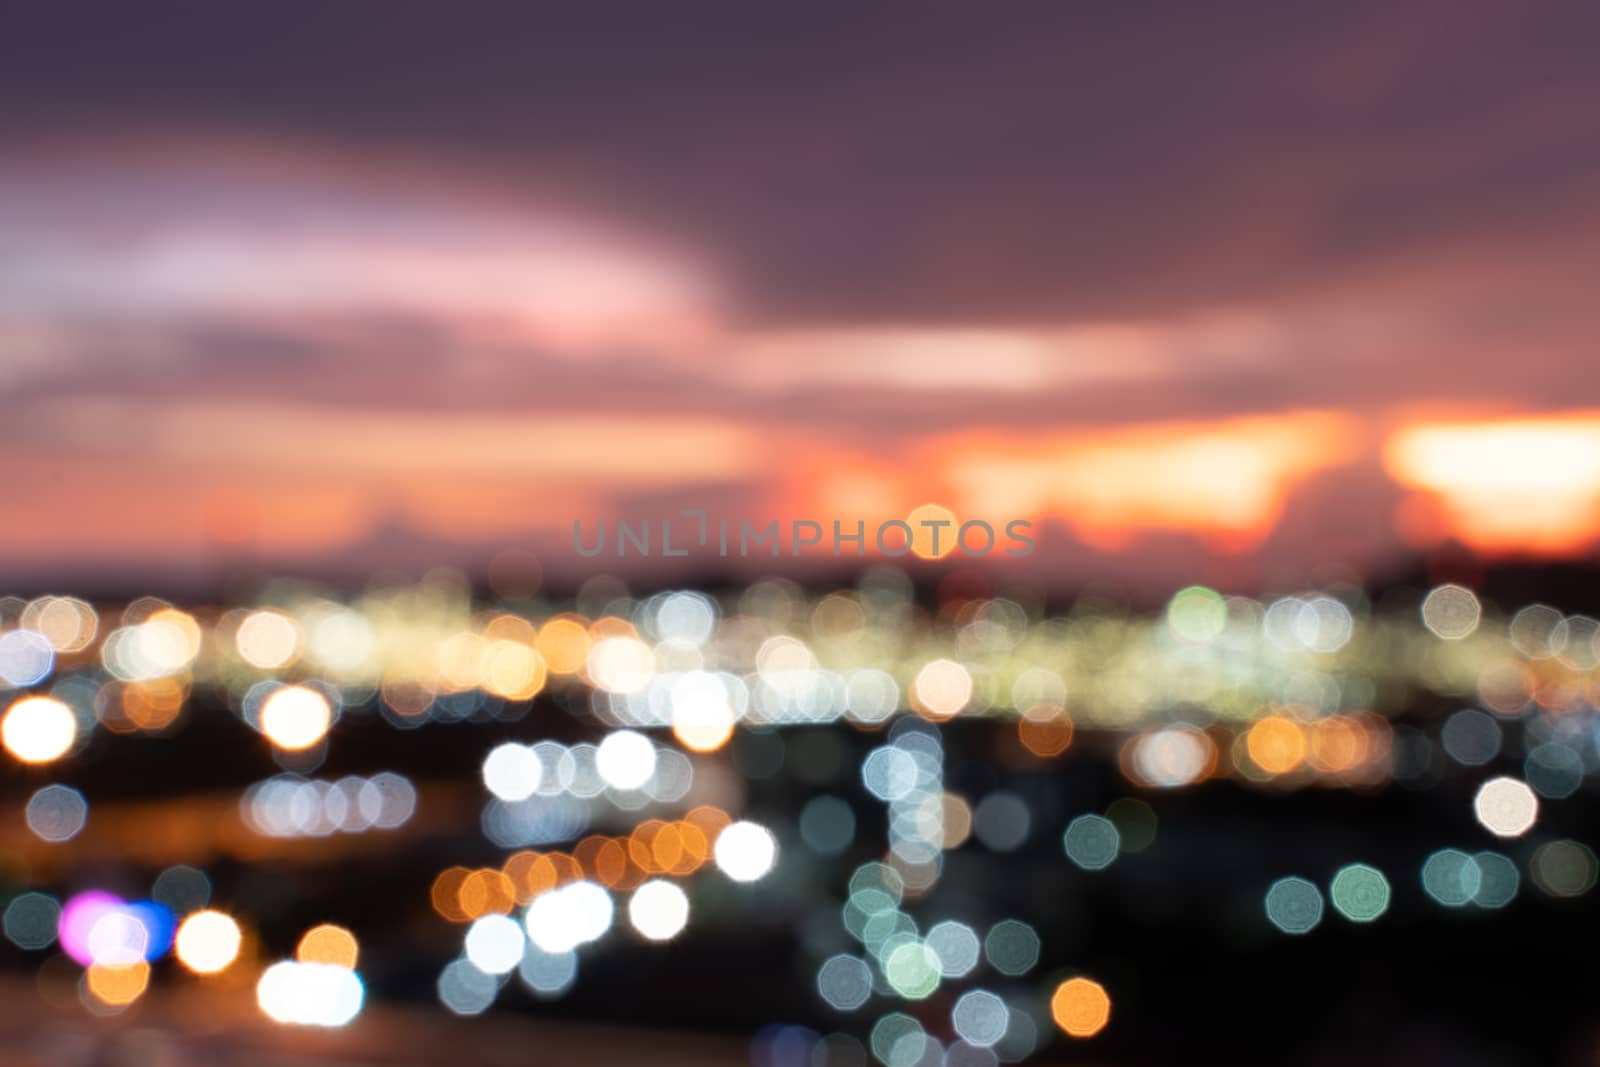 The Abstract urban night light bokeh defocused background